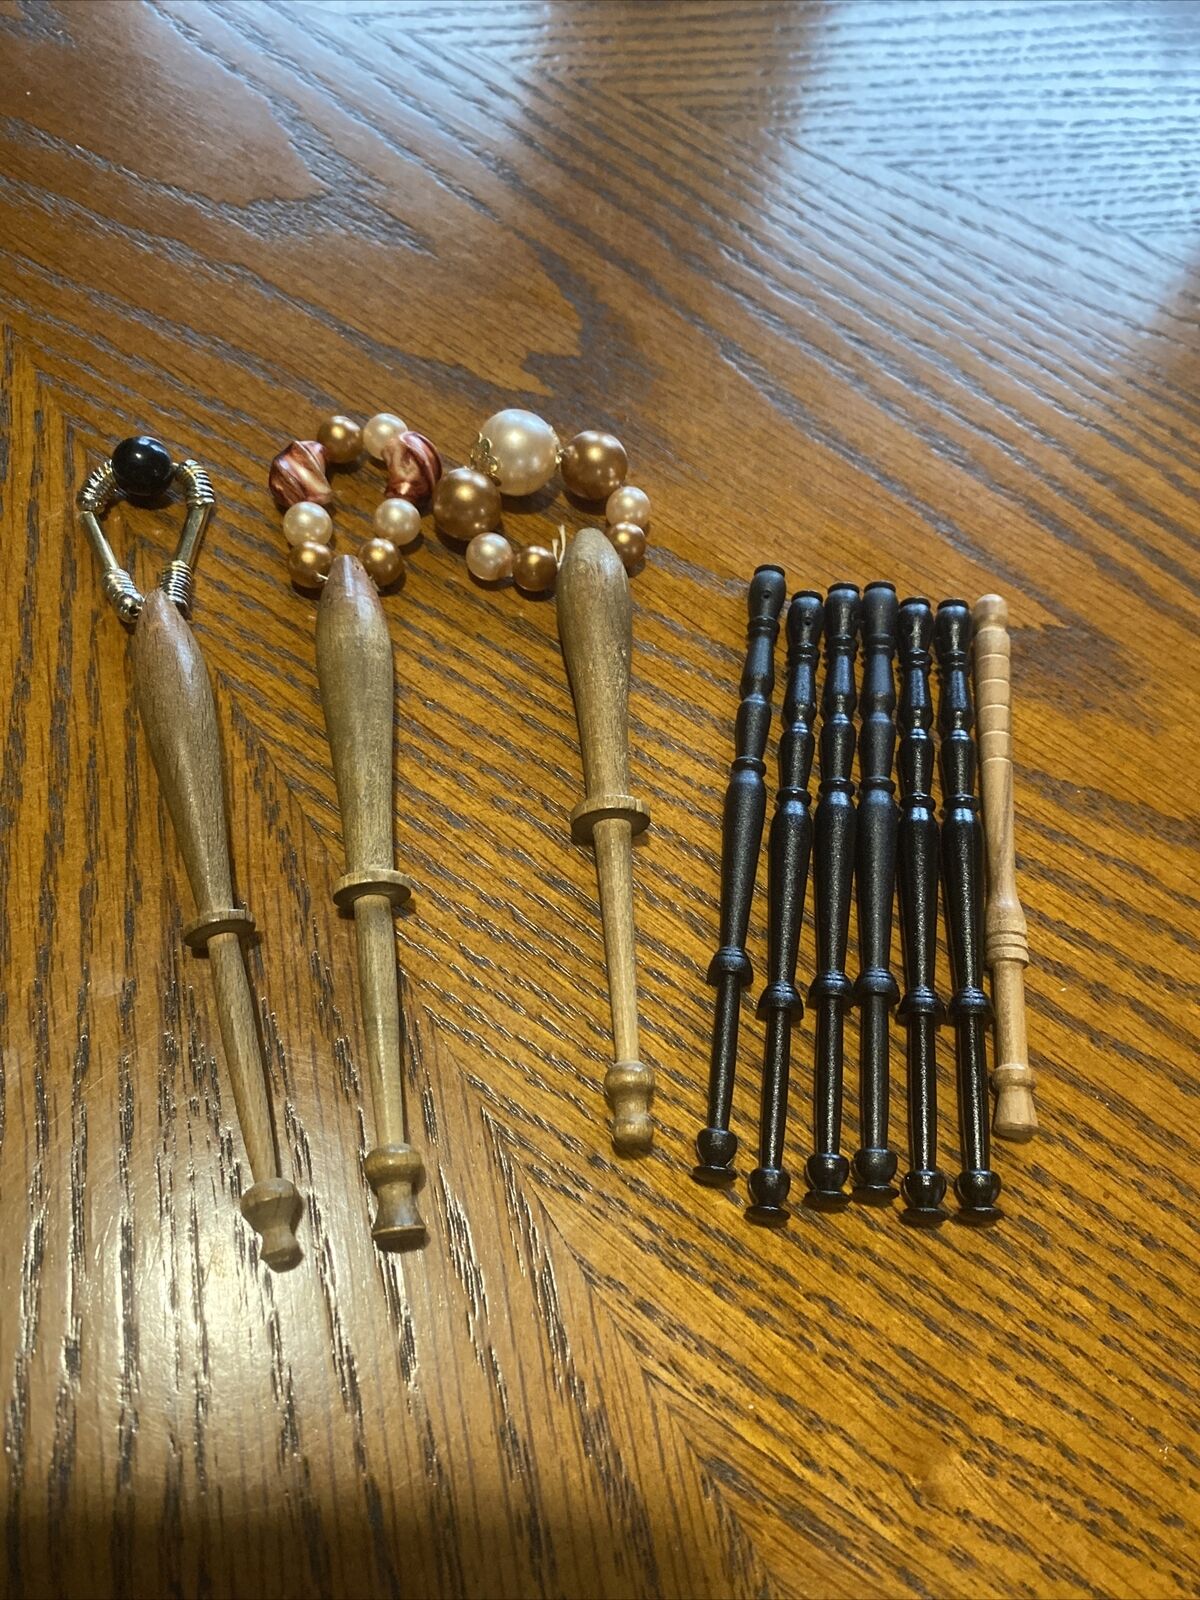 Wooden Lace Making Bobbins Spindles